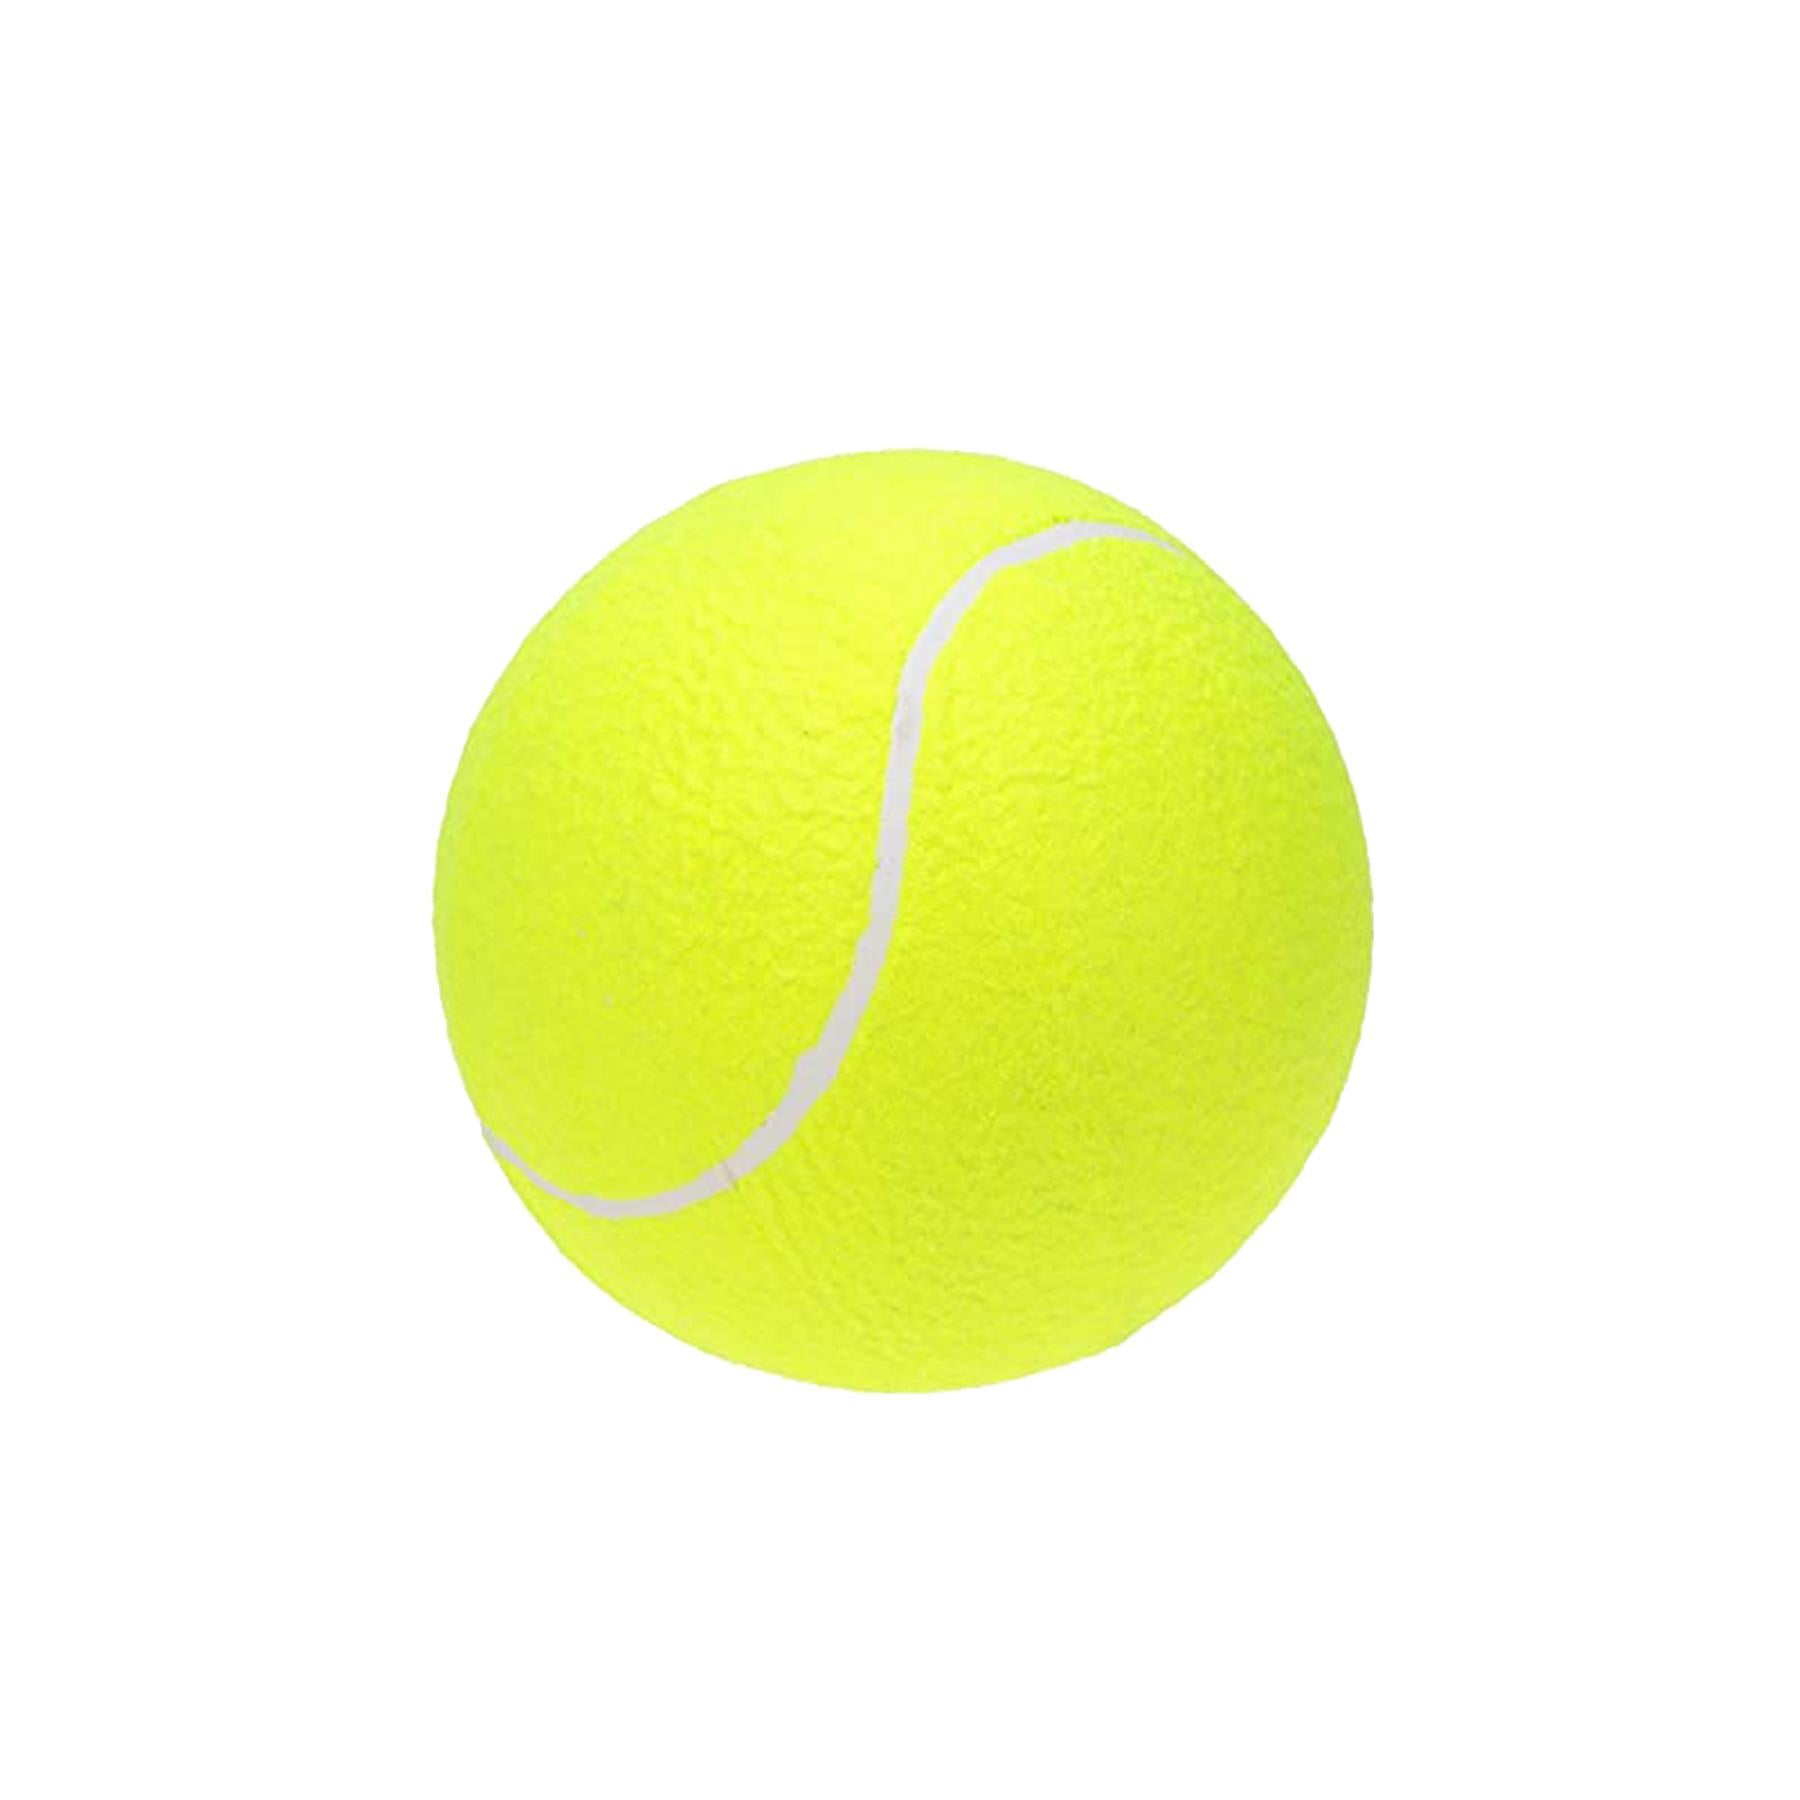 Giant Tennis Ball 24cm by The Magic Toy Shop - The Magic Toy Shop